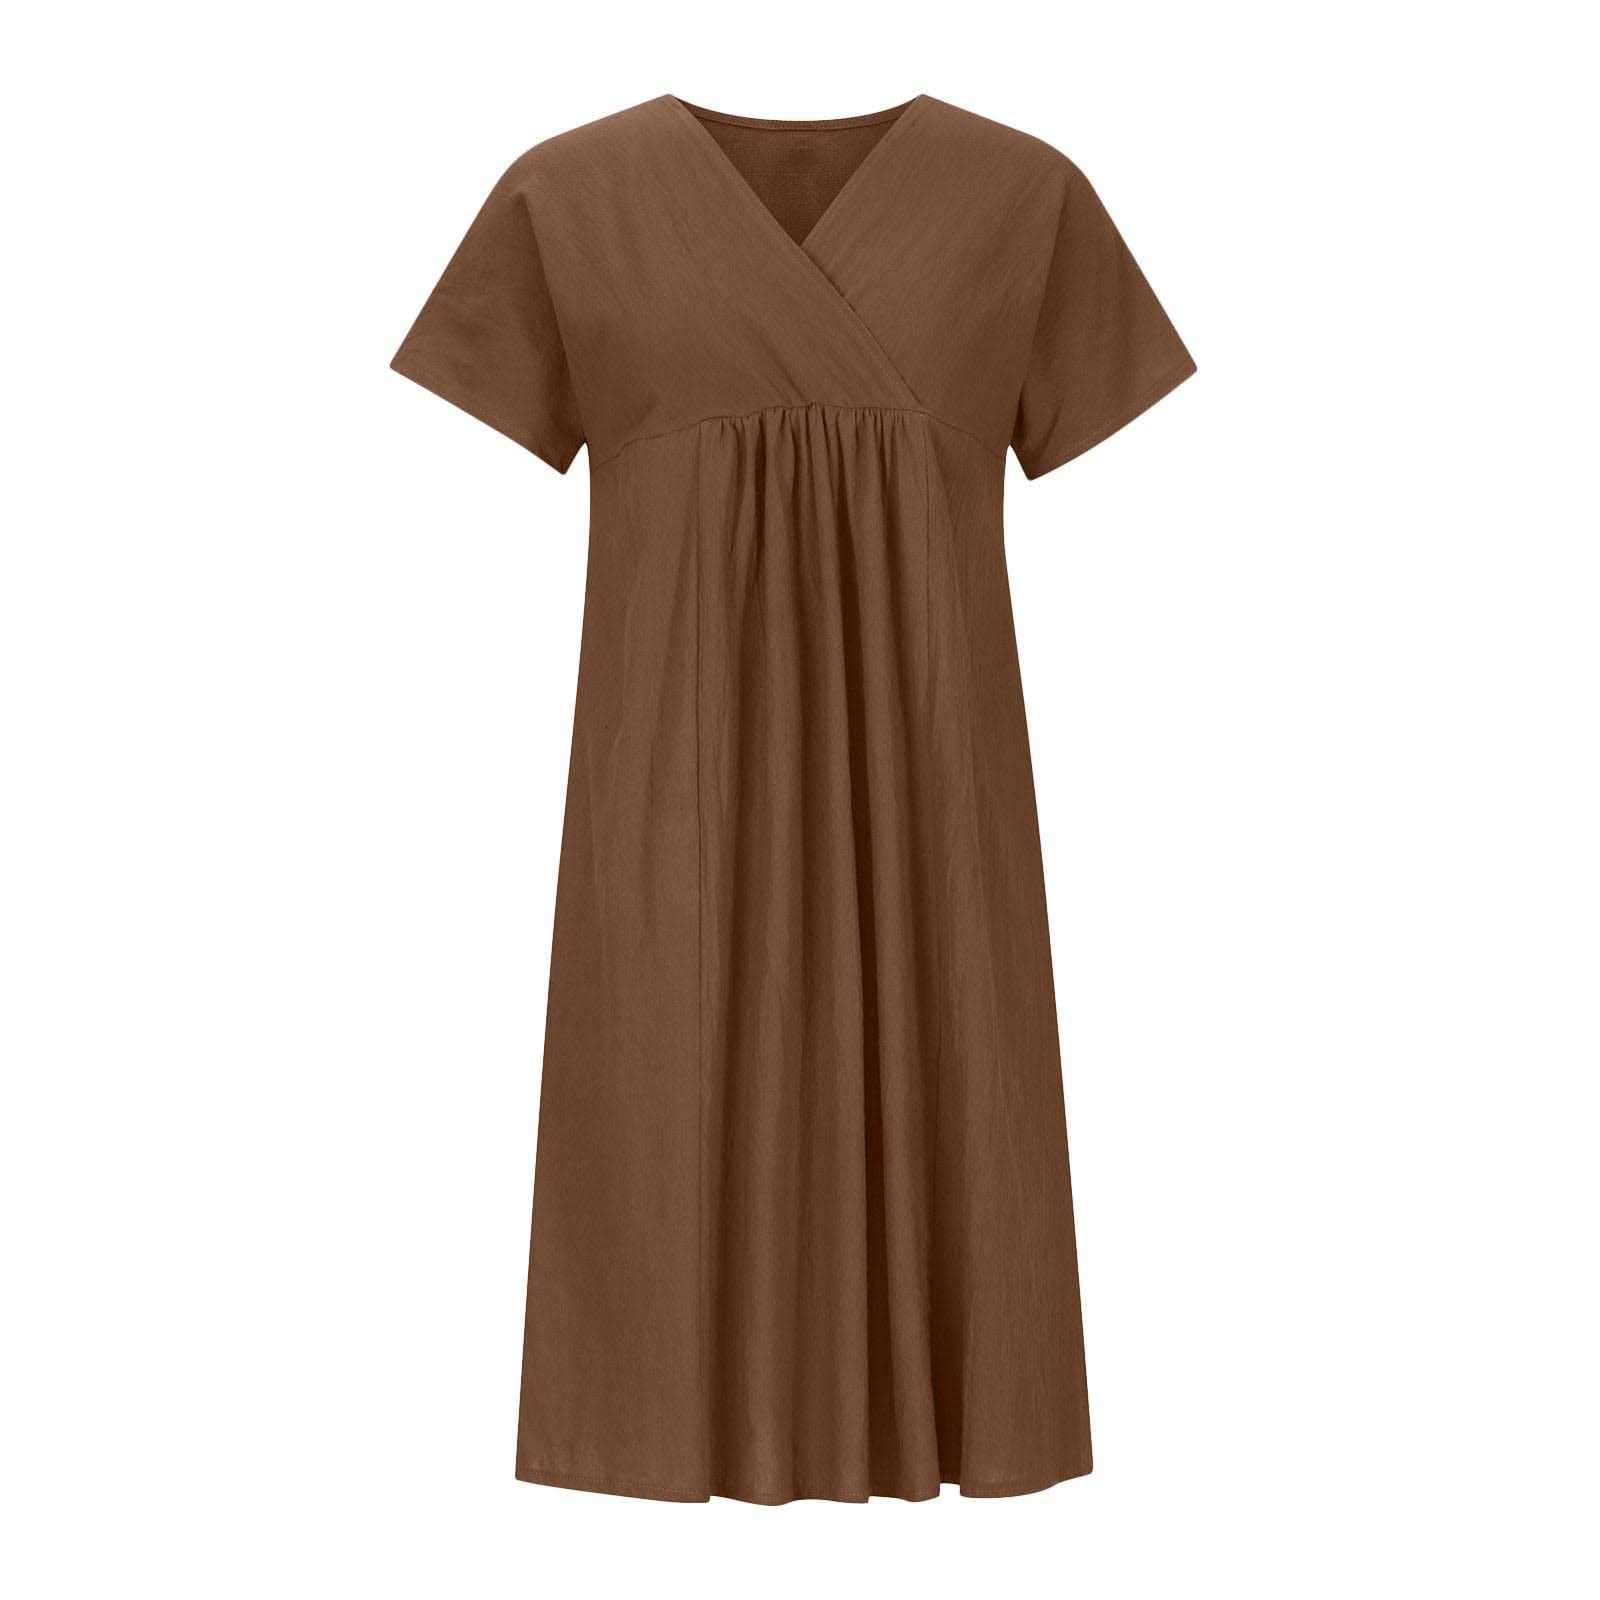 BEEYASO Clearance Summer Dresses for Women Solid V-Neck A-Line